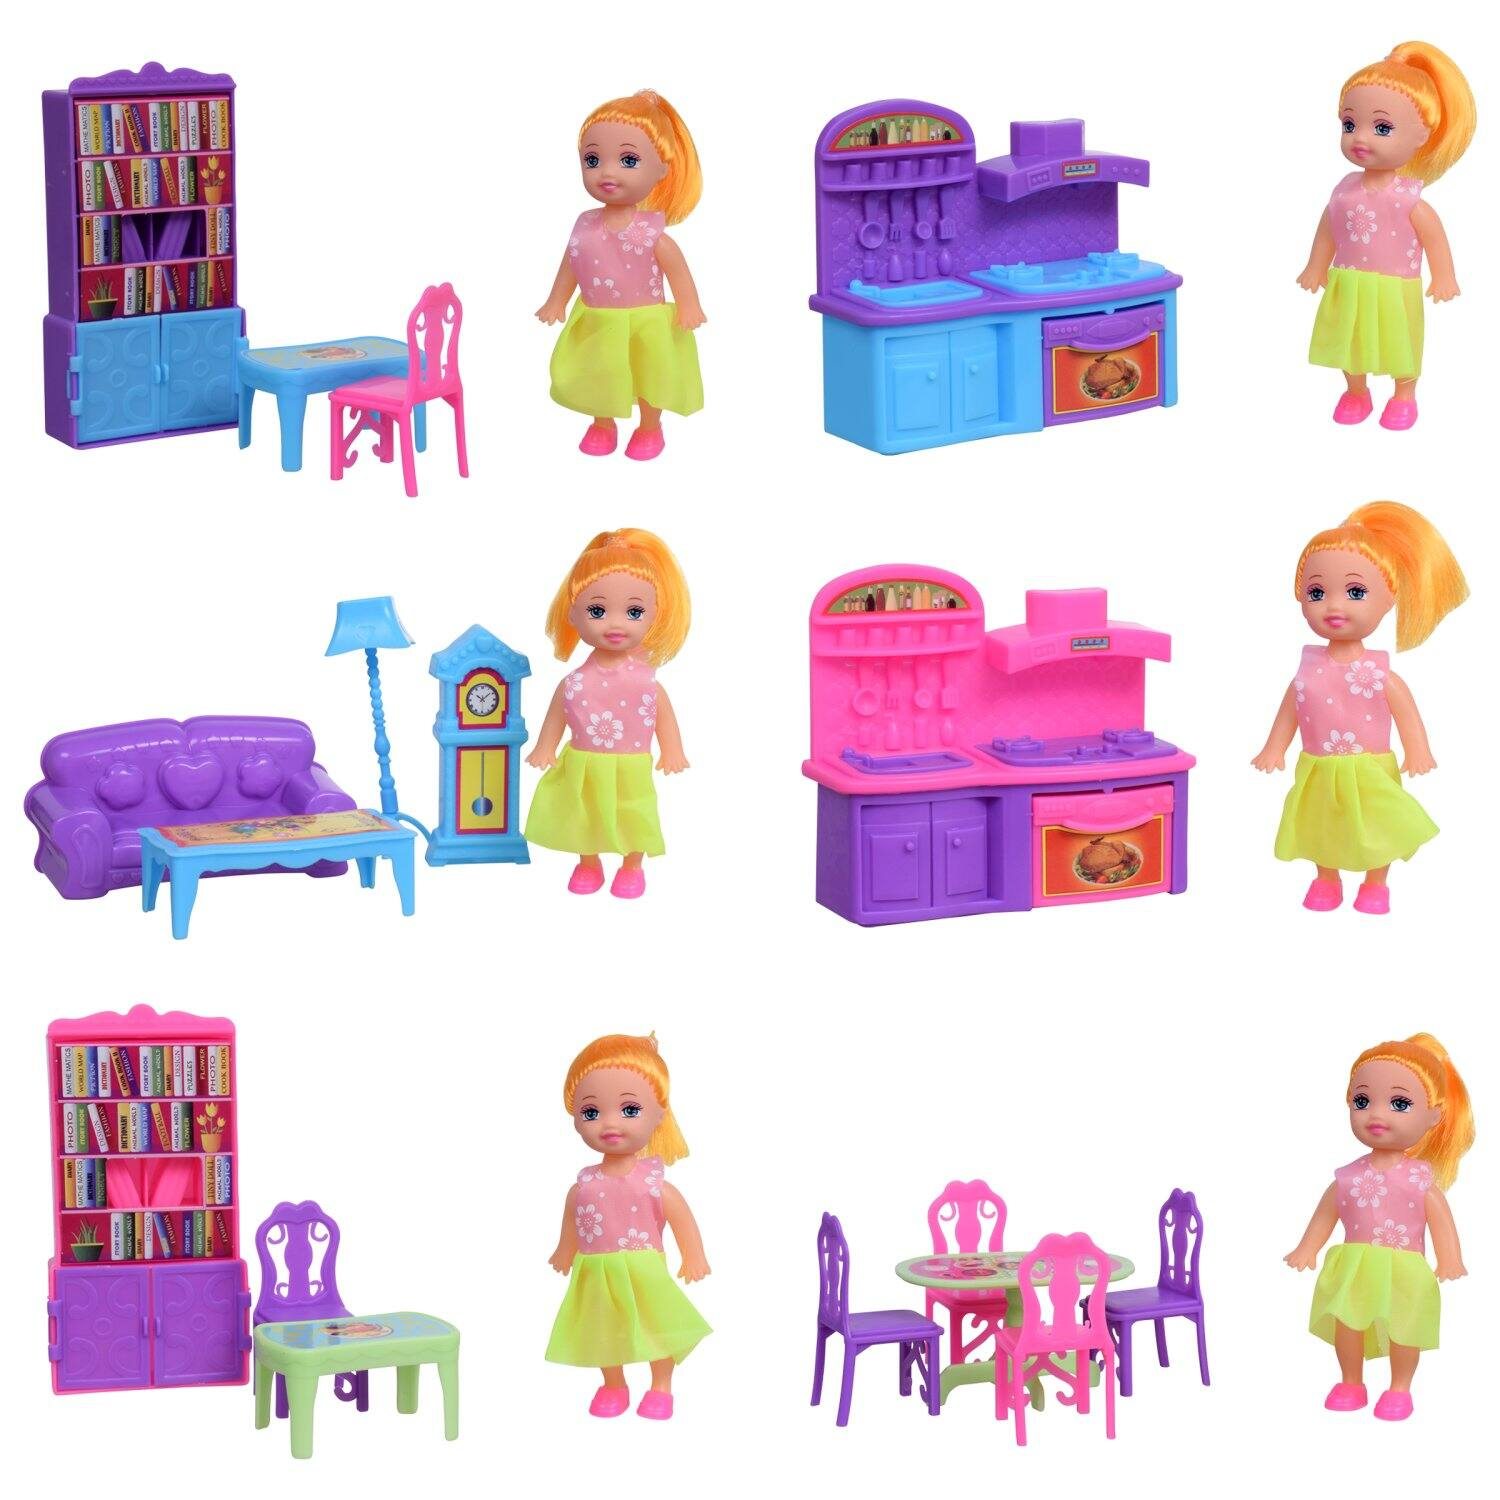 Mini Dolls with Doll House Furniture Sets